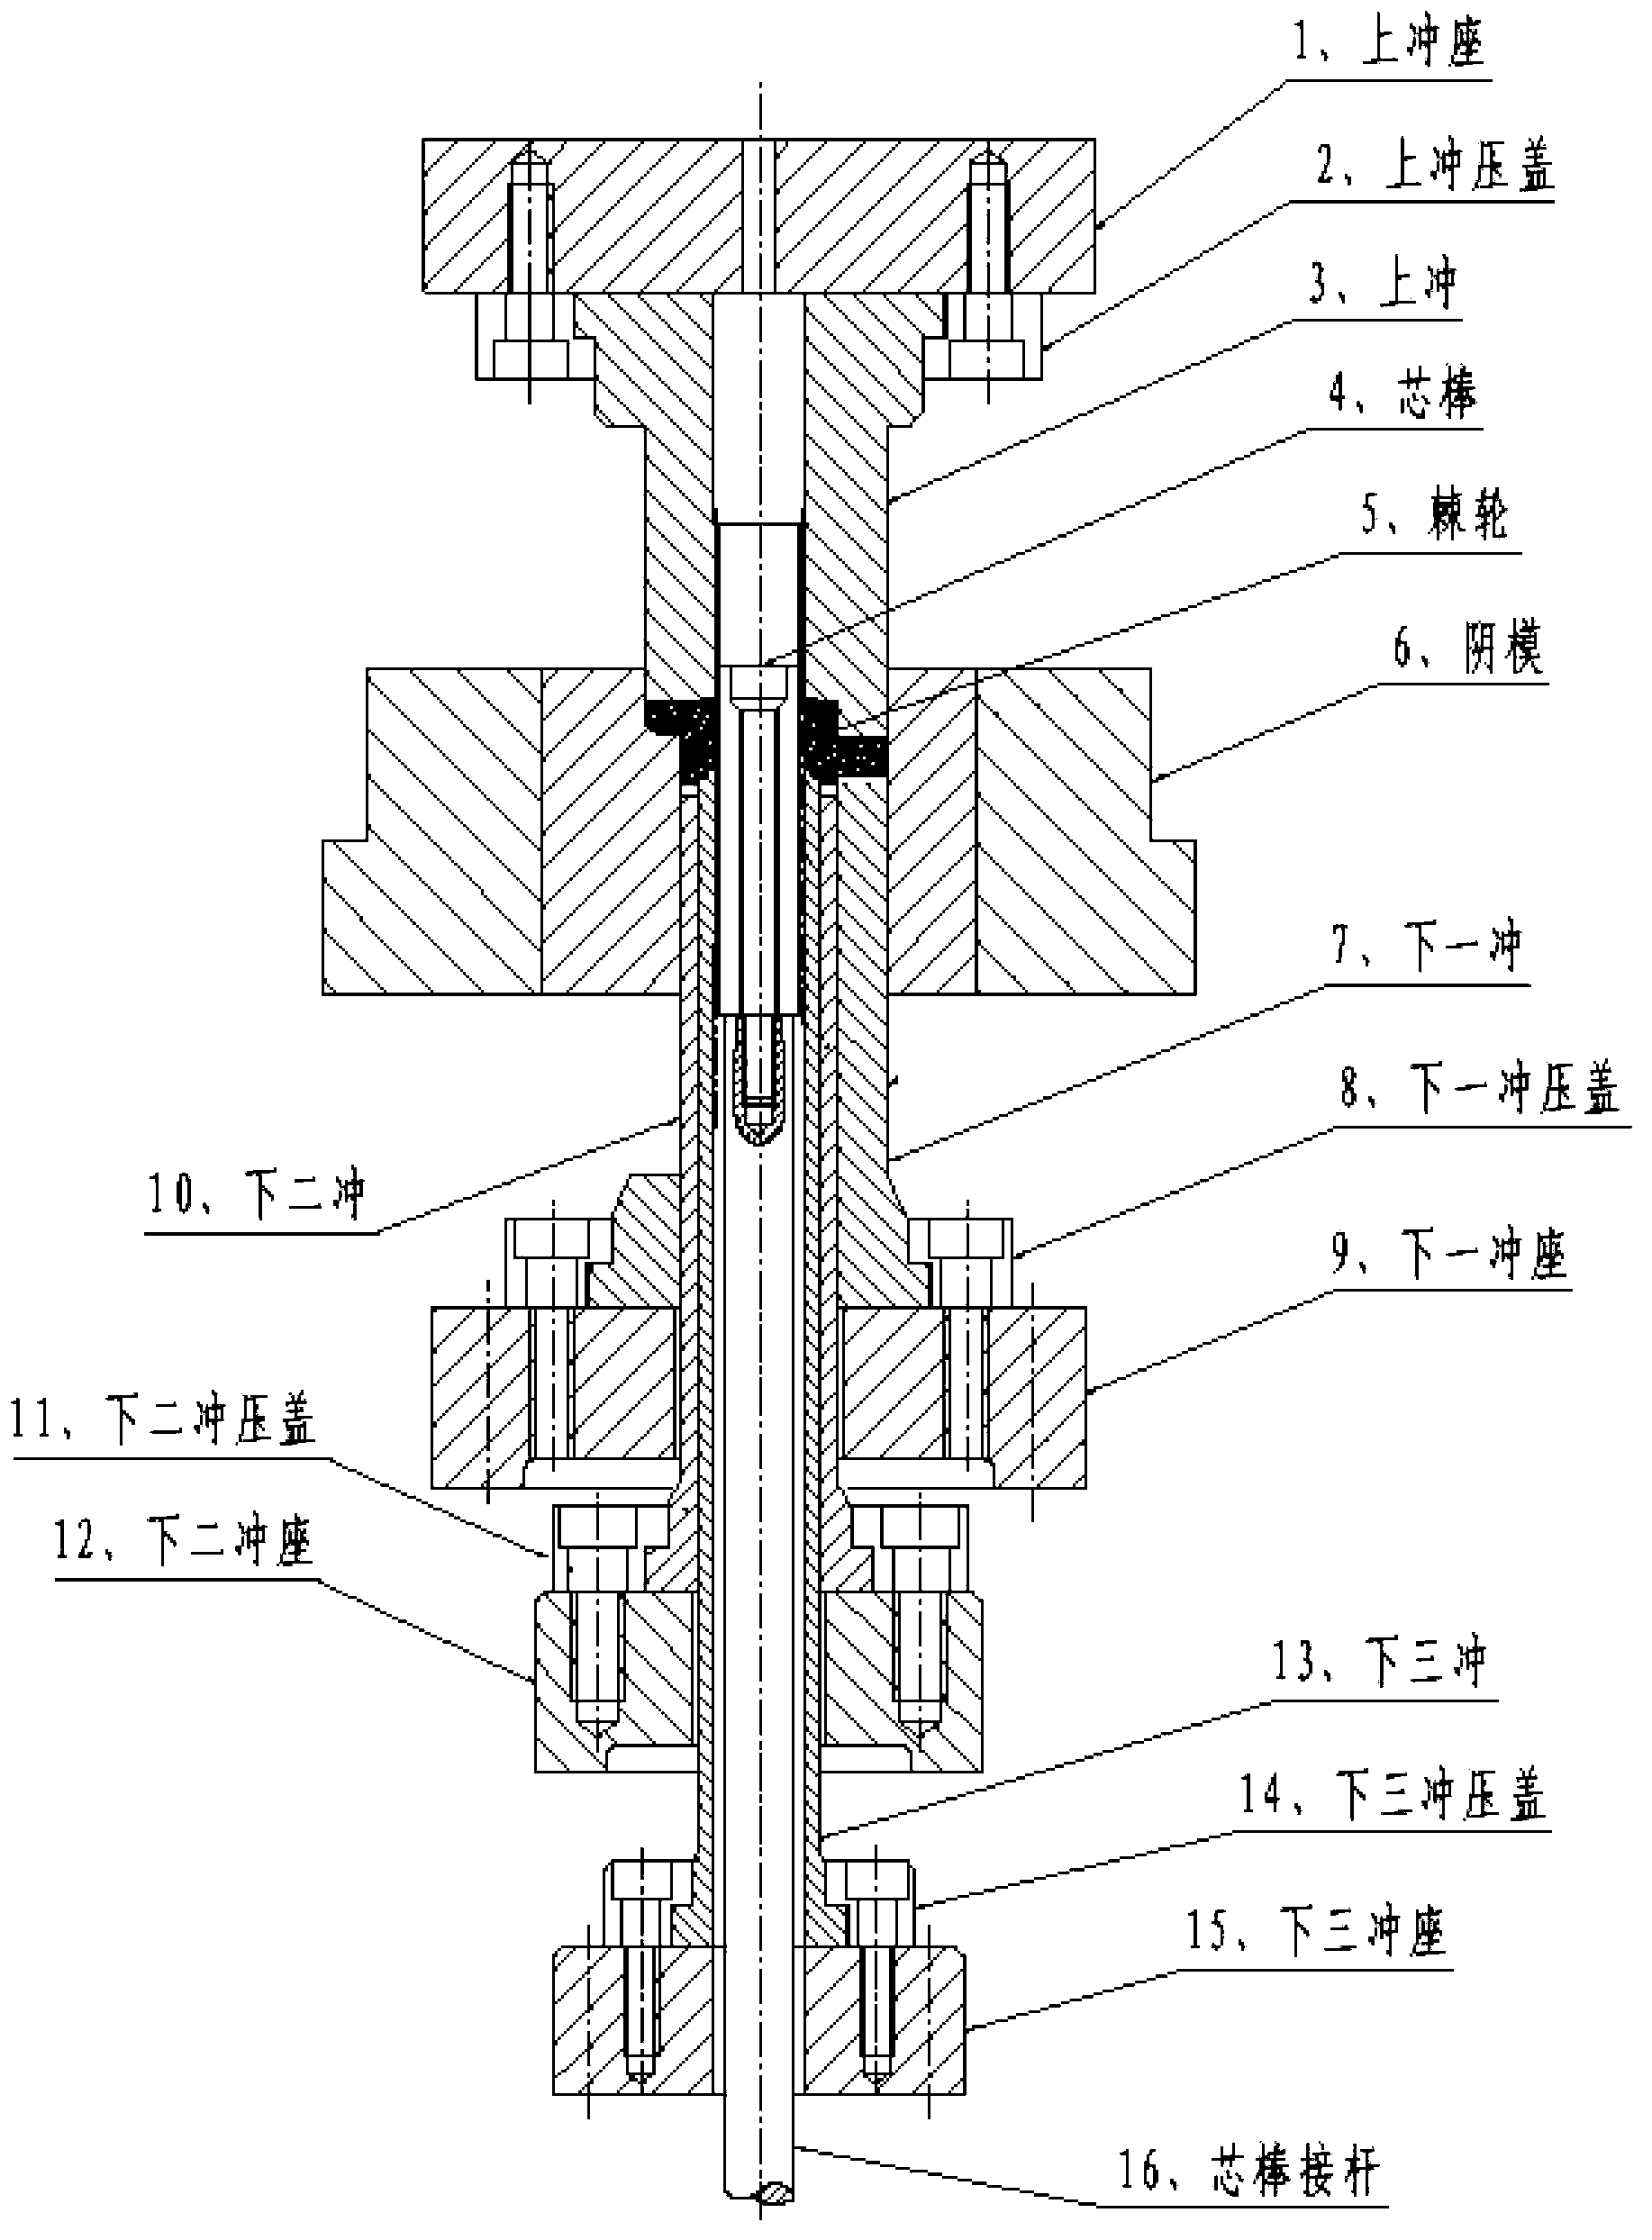 Method for manufacturing starting ratchet wheel of motorcycle